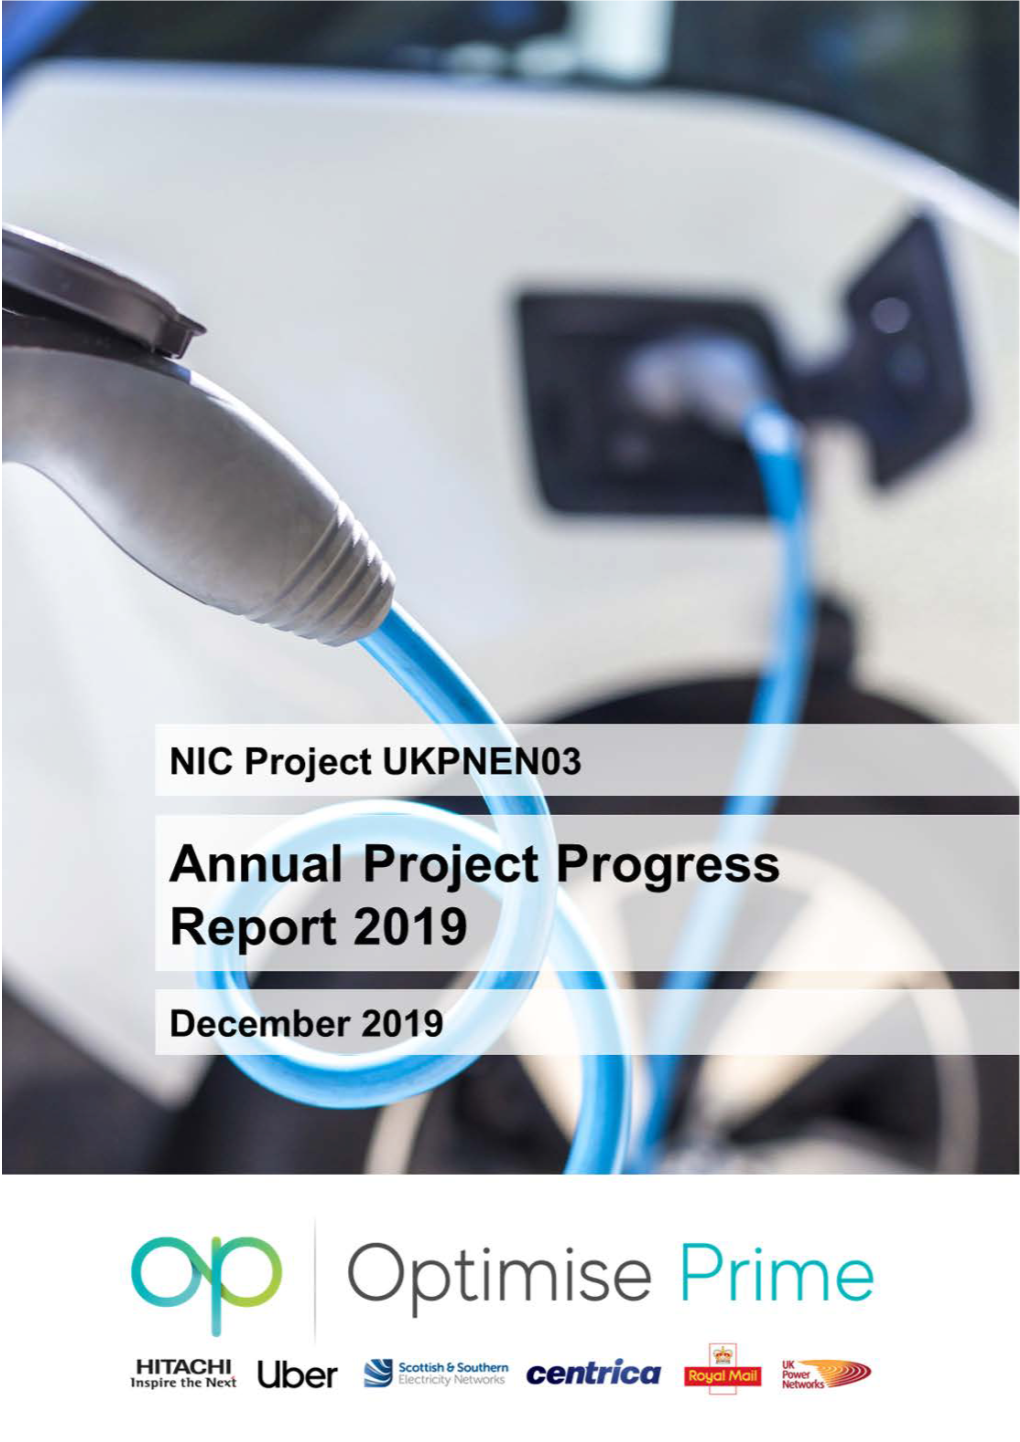 Annual Project Progress Report 2019 Optimise Prime Page 1 of 40